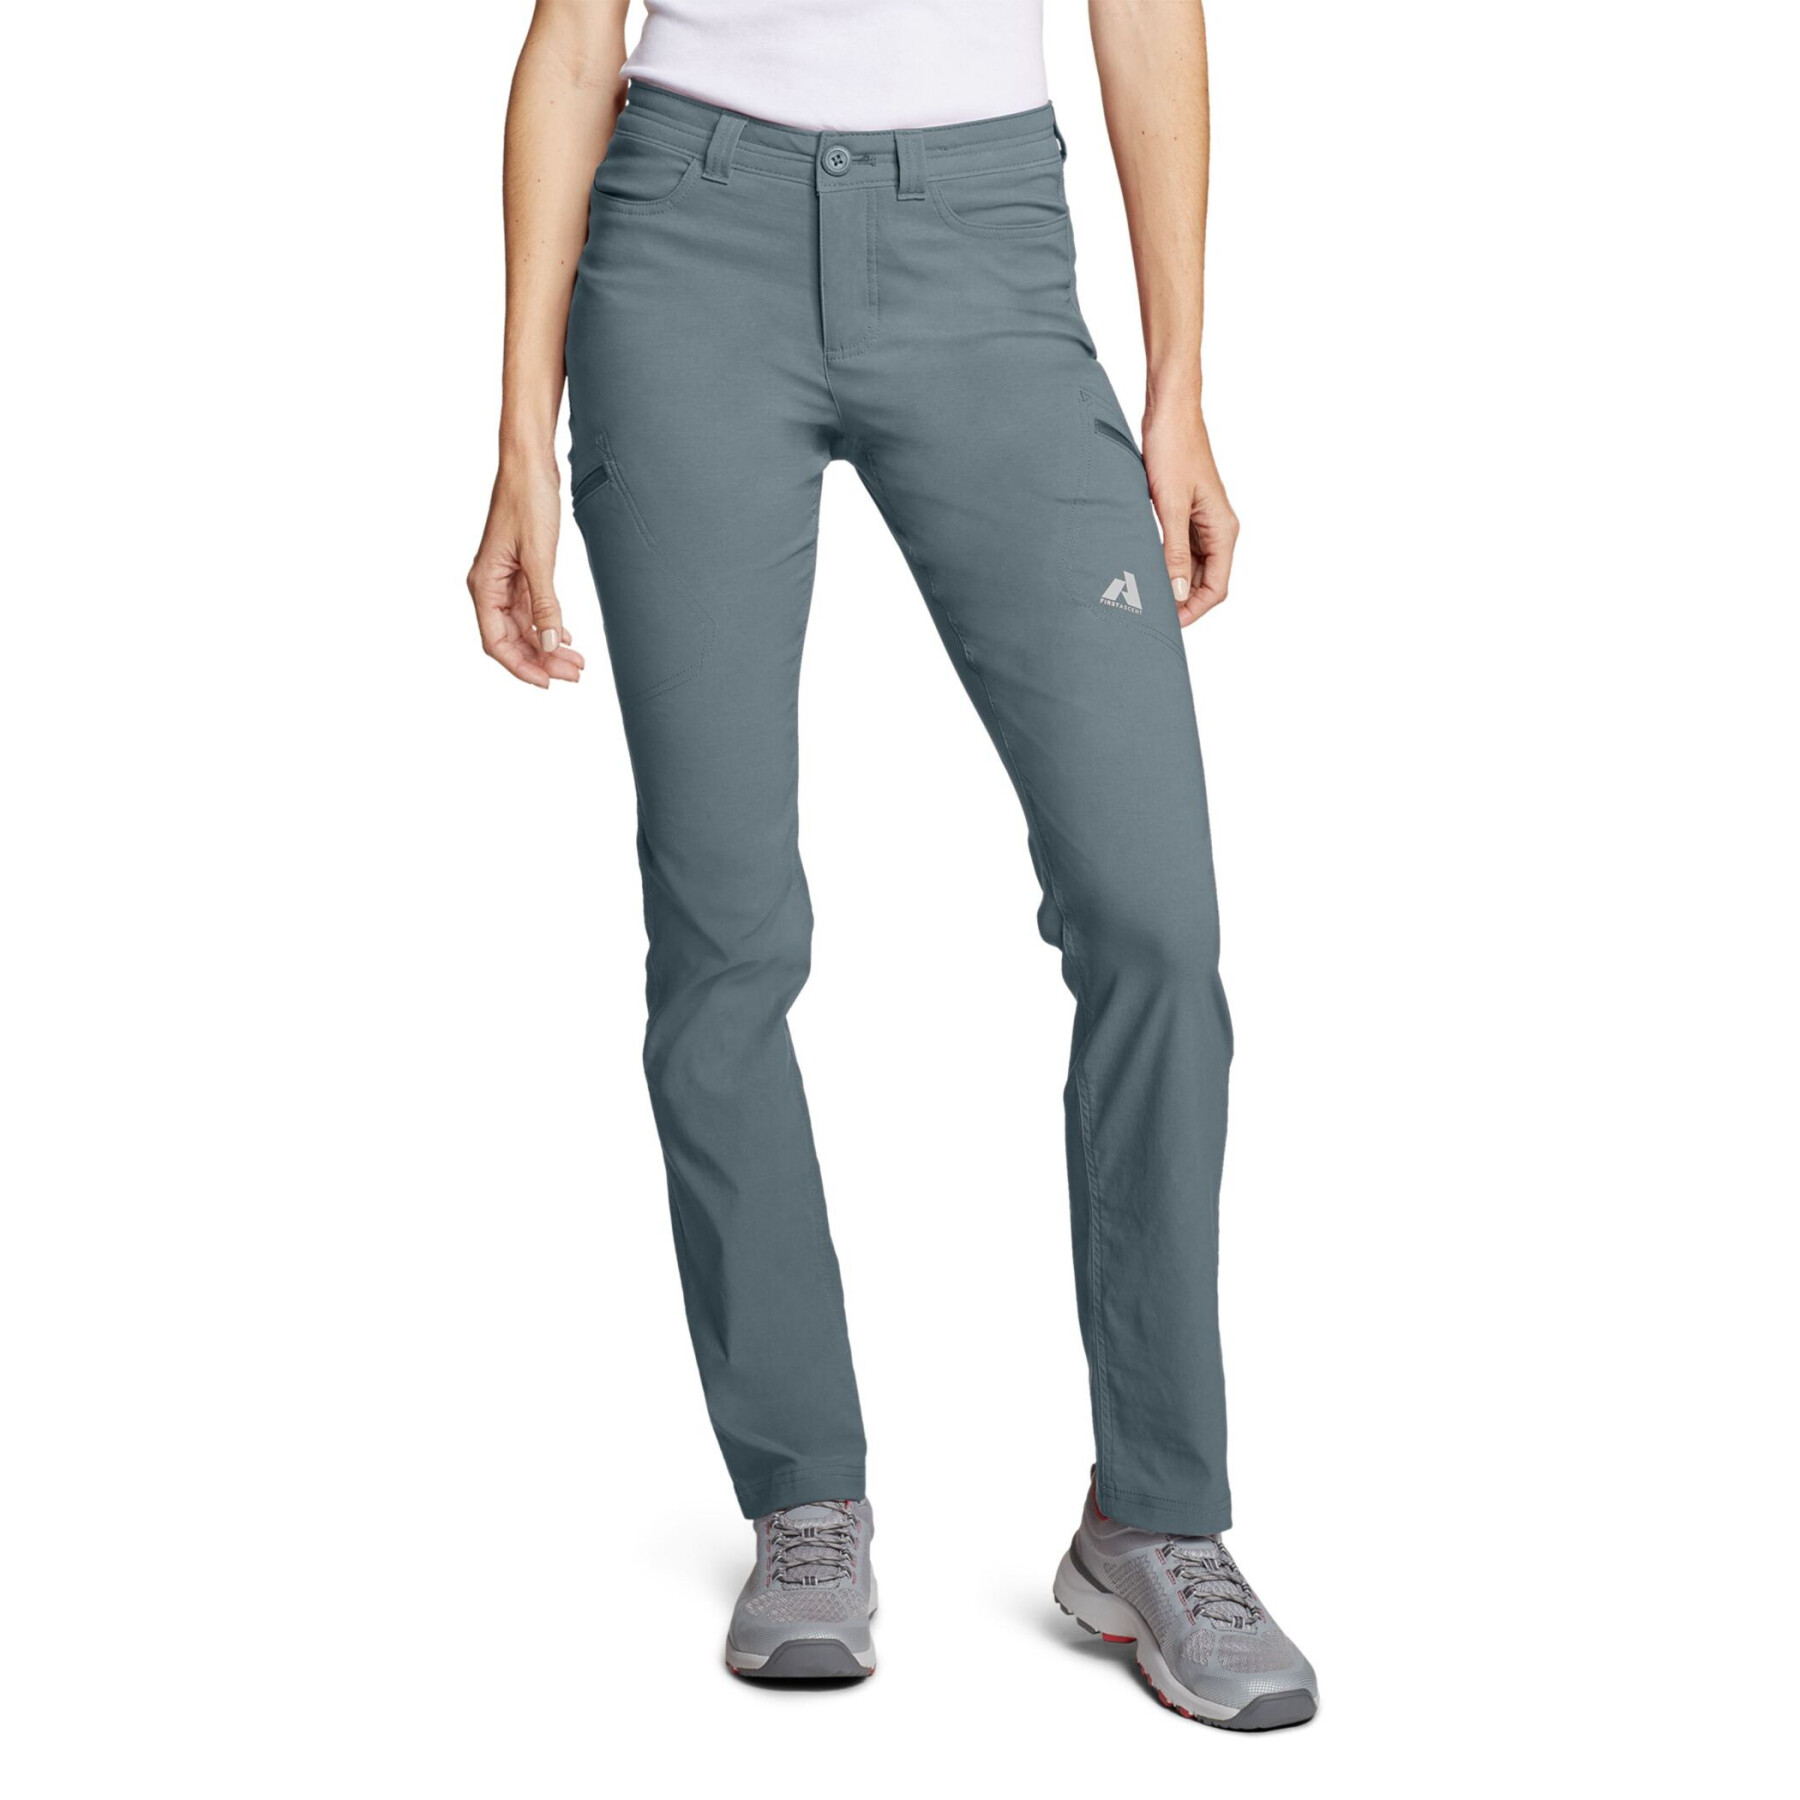 Girl's cargo pants Eddie Bauer Guide - Trousers & Jeans - Clothing - Kids